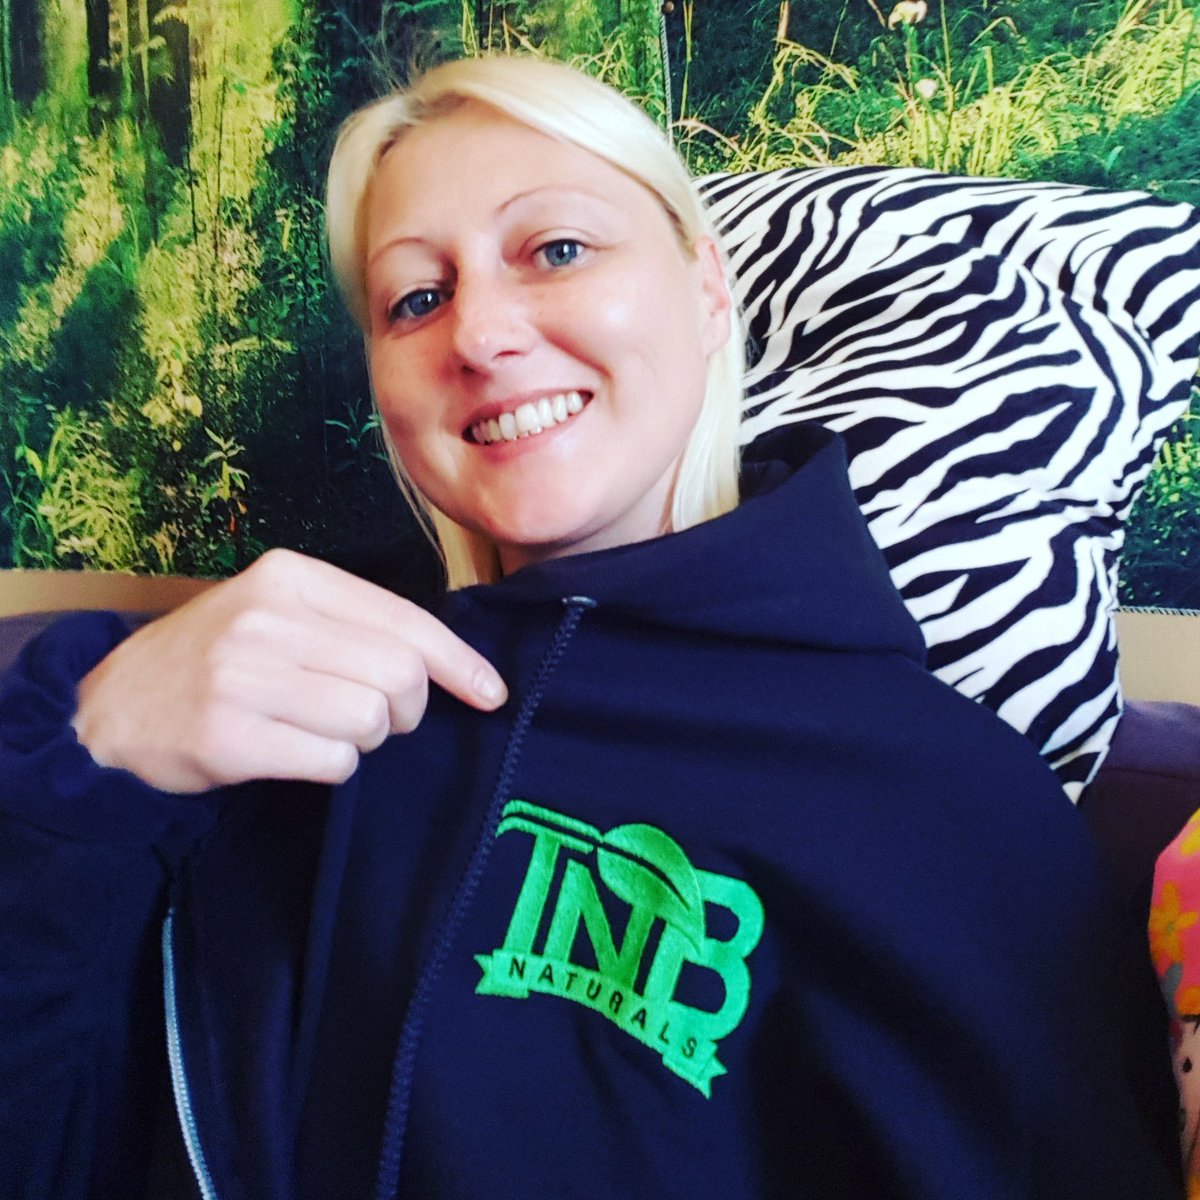 Happy growing with TNB Naturals @tnbnatural